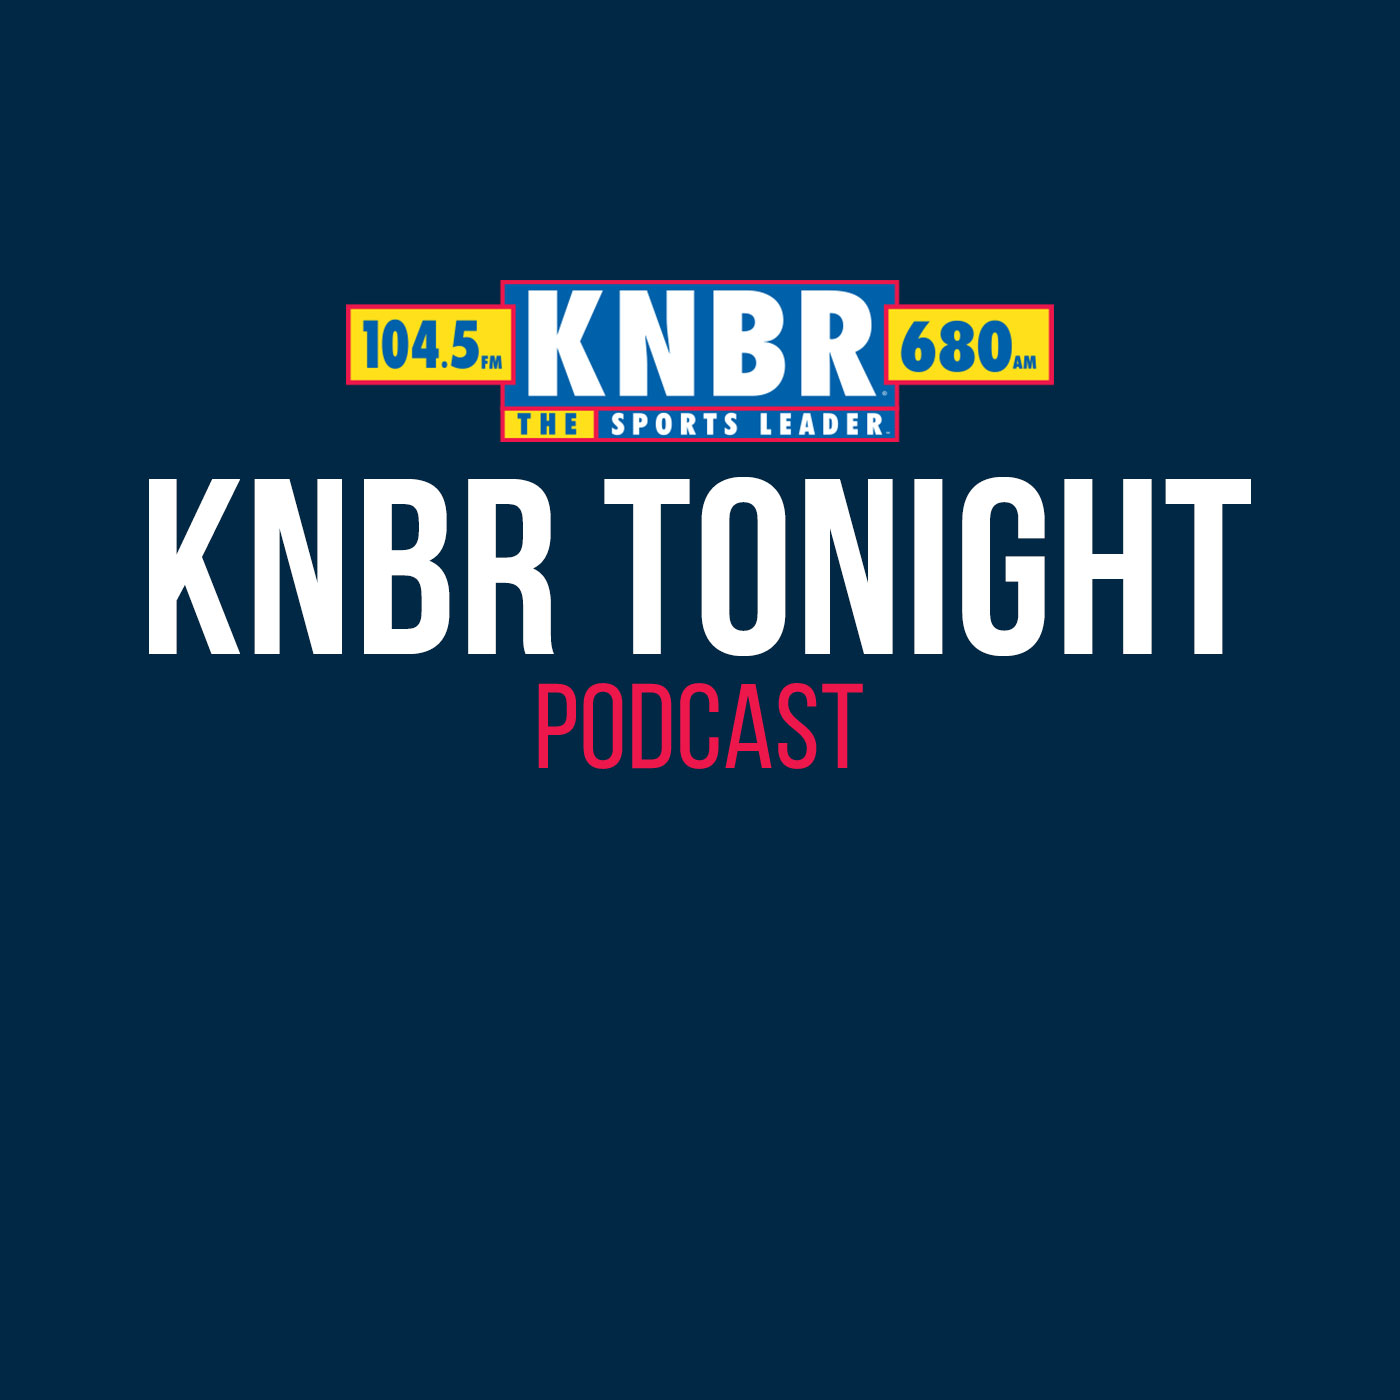 2-11 Evan Webeck joins KNBR Tonight w/ Dieter to break down the Warriors 2-game losing streak after the Knicks loss on Thursday Night